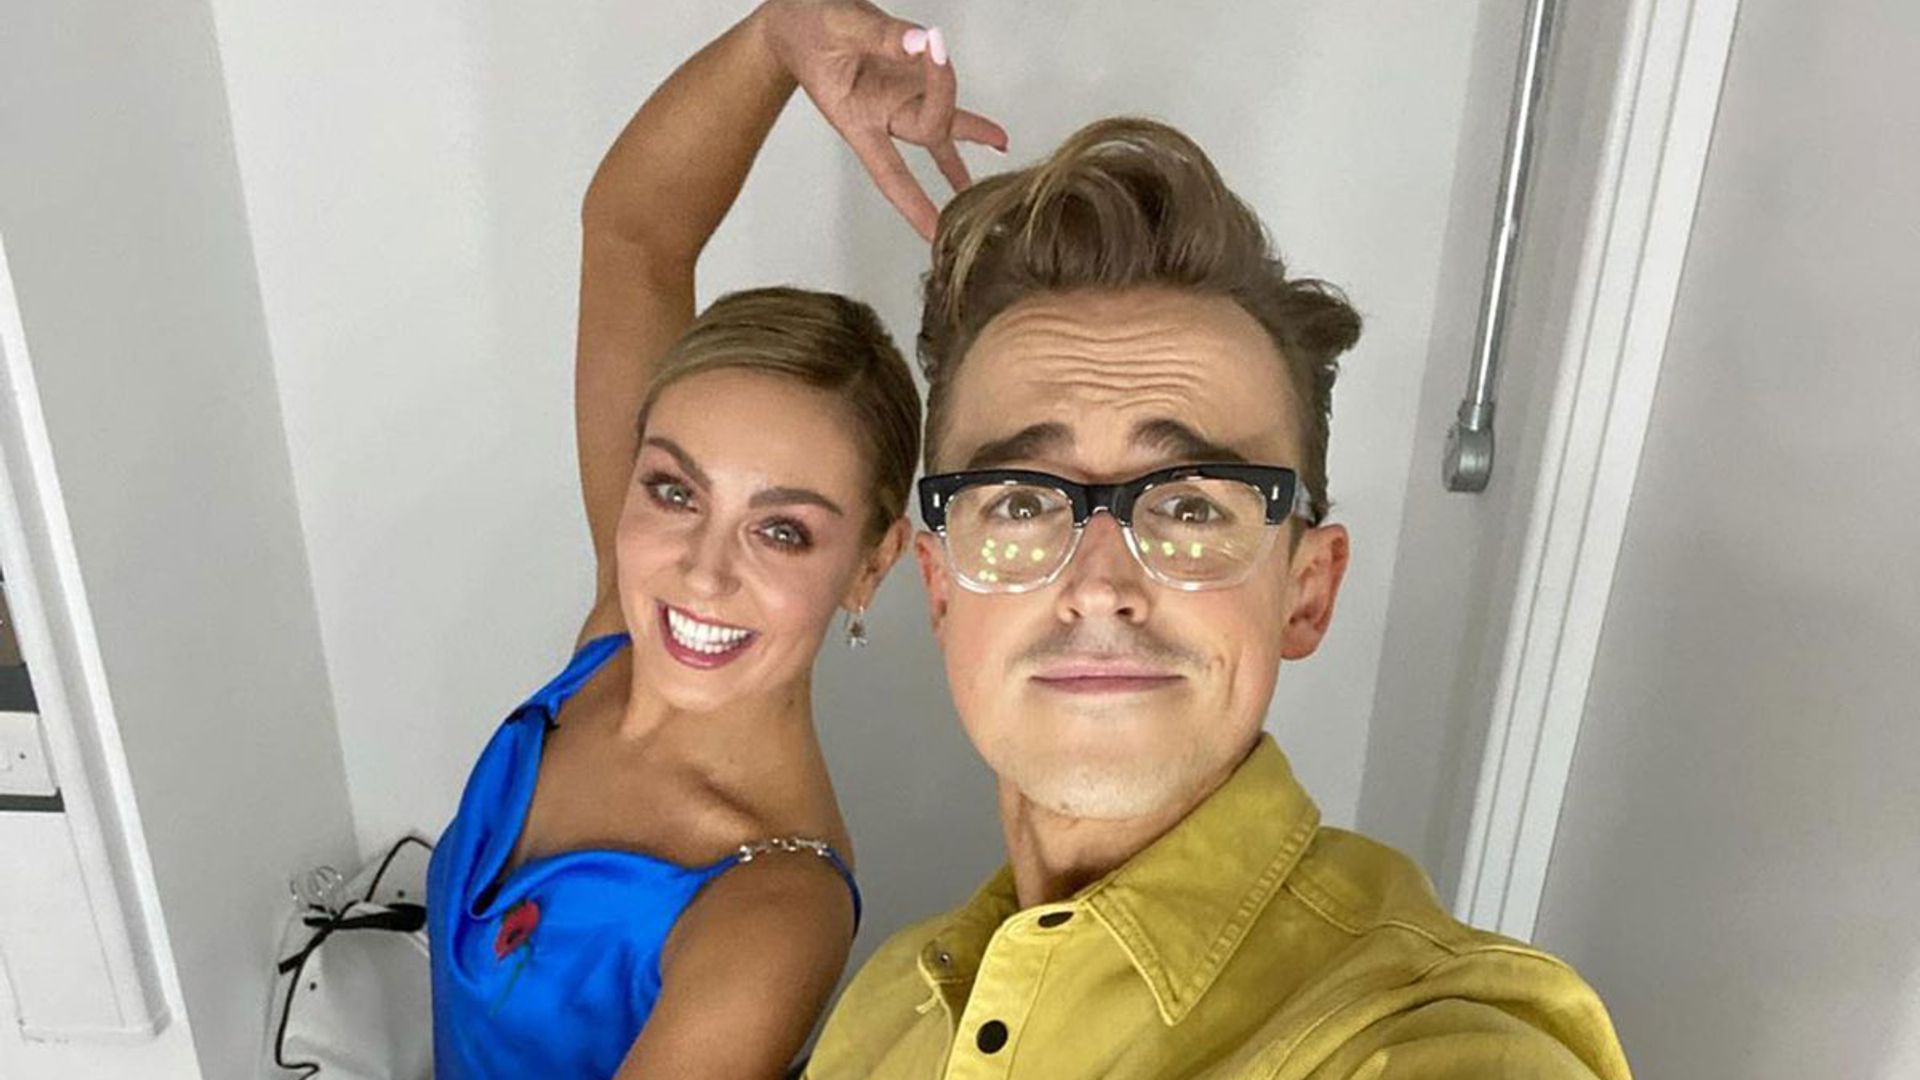 Tom Fletcher 'absolutely gutted' after Strictly exit - reveals sadness on 'difficult day'